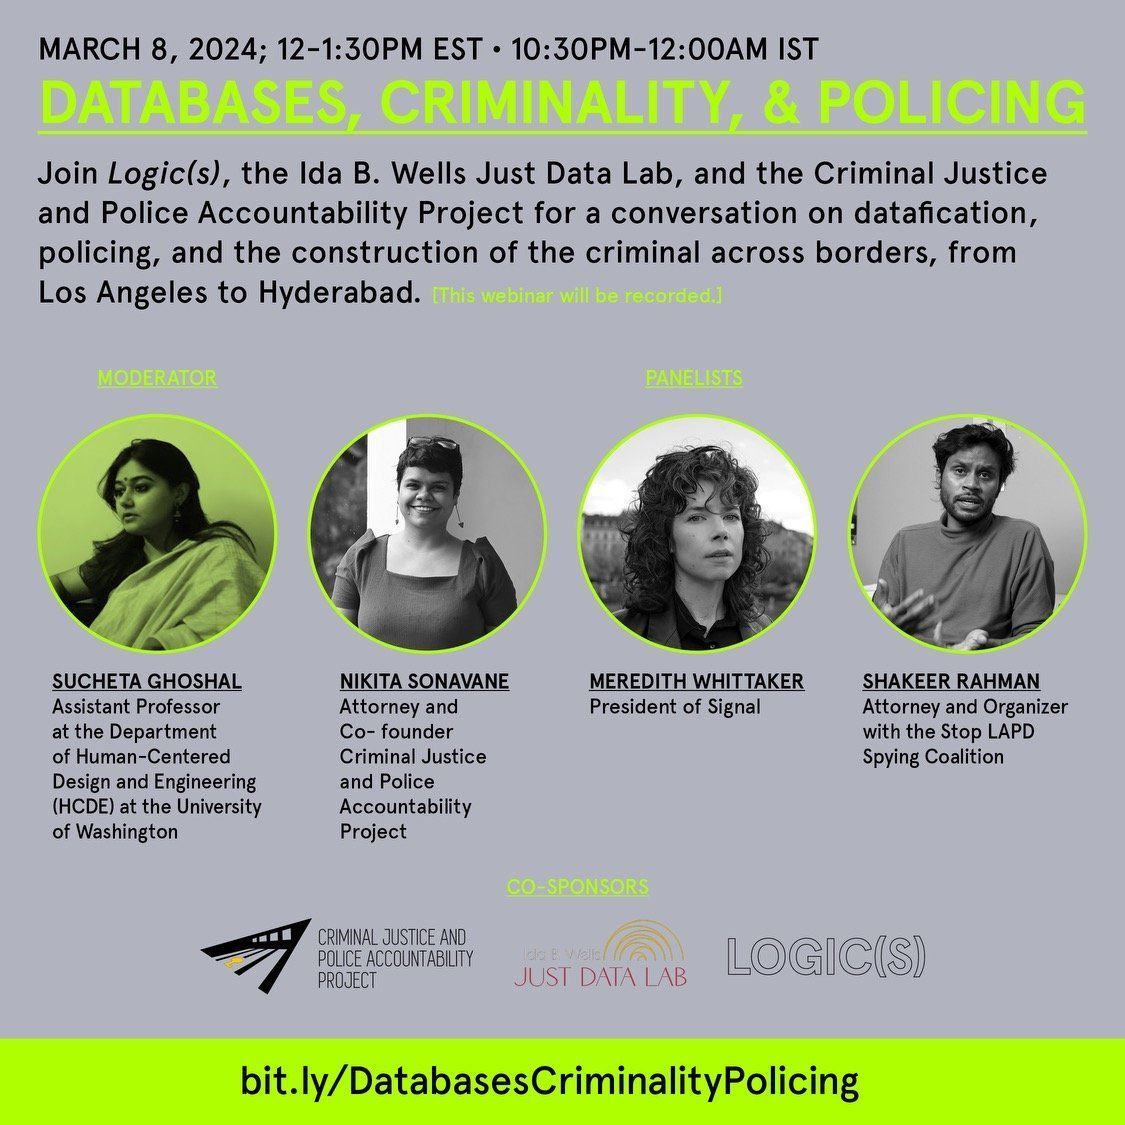 ⚖️ Interested in crime & justice data? Next week, join Ida B. Wells Just Data Lab, @logic_magazine & @CPAProjectIndia for a conversation on datafication, policing, and the construction of the criminal across borders, from LA to Hyderabad. Register here: buff.ly/48FMvMe